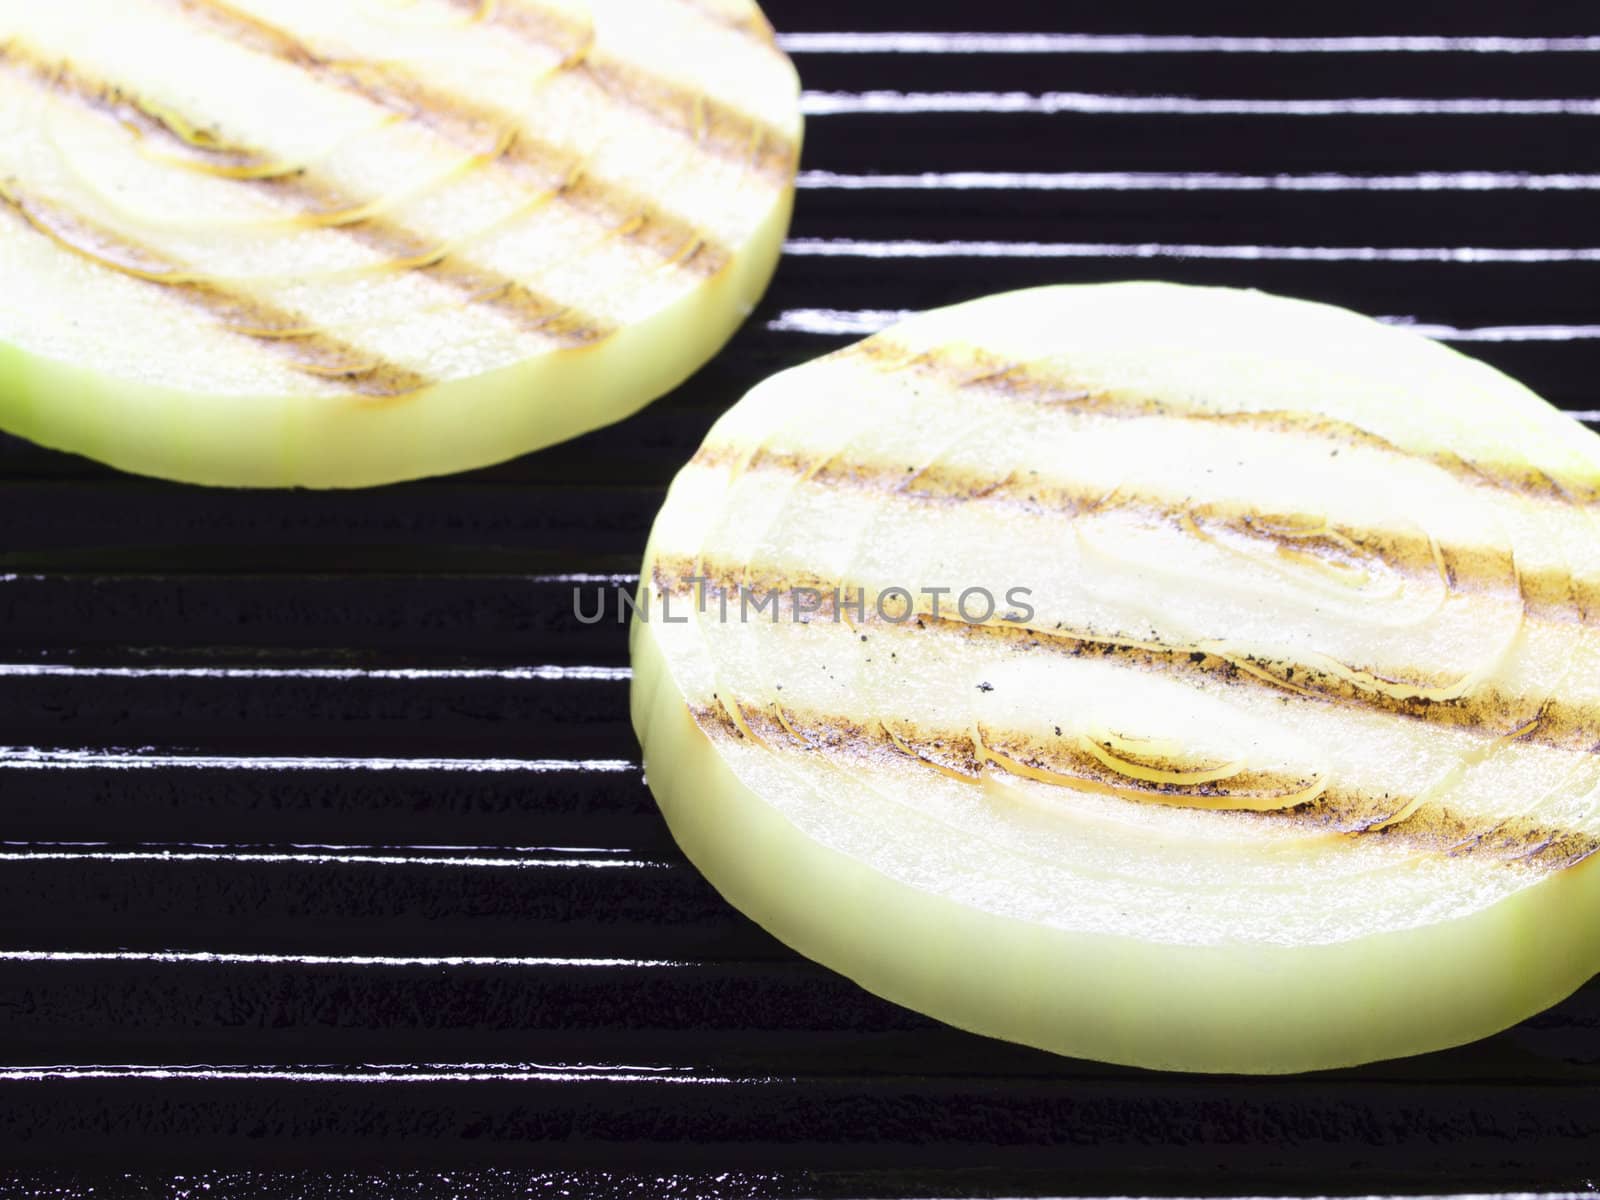 grilled onions by zkruger